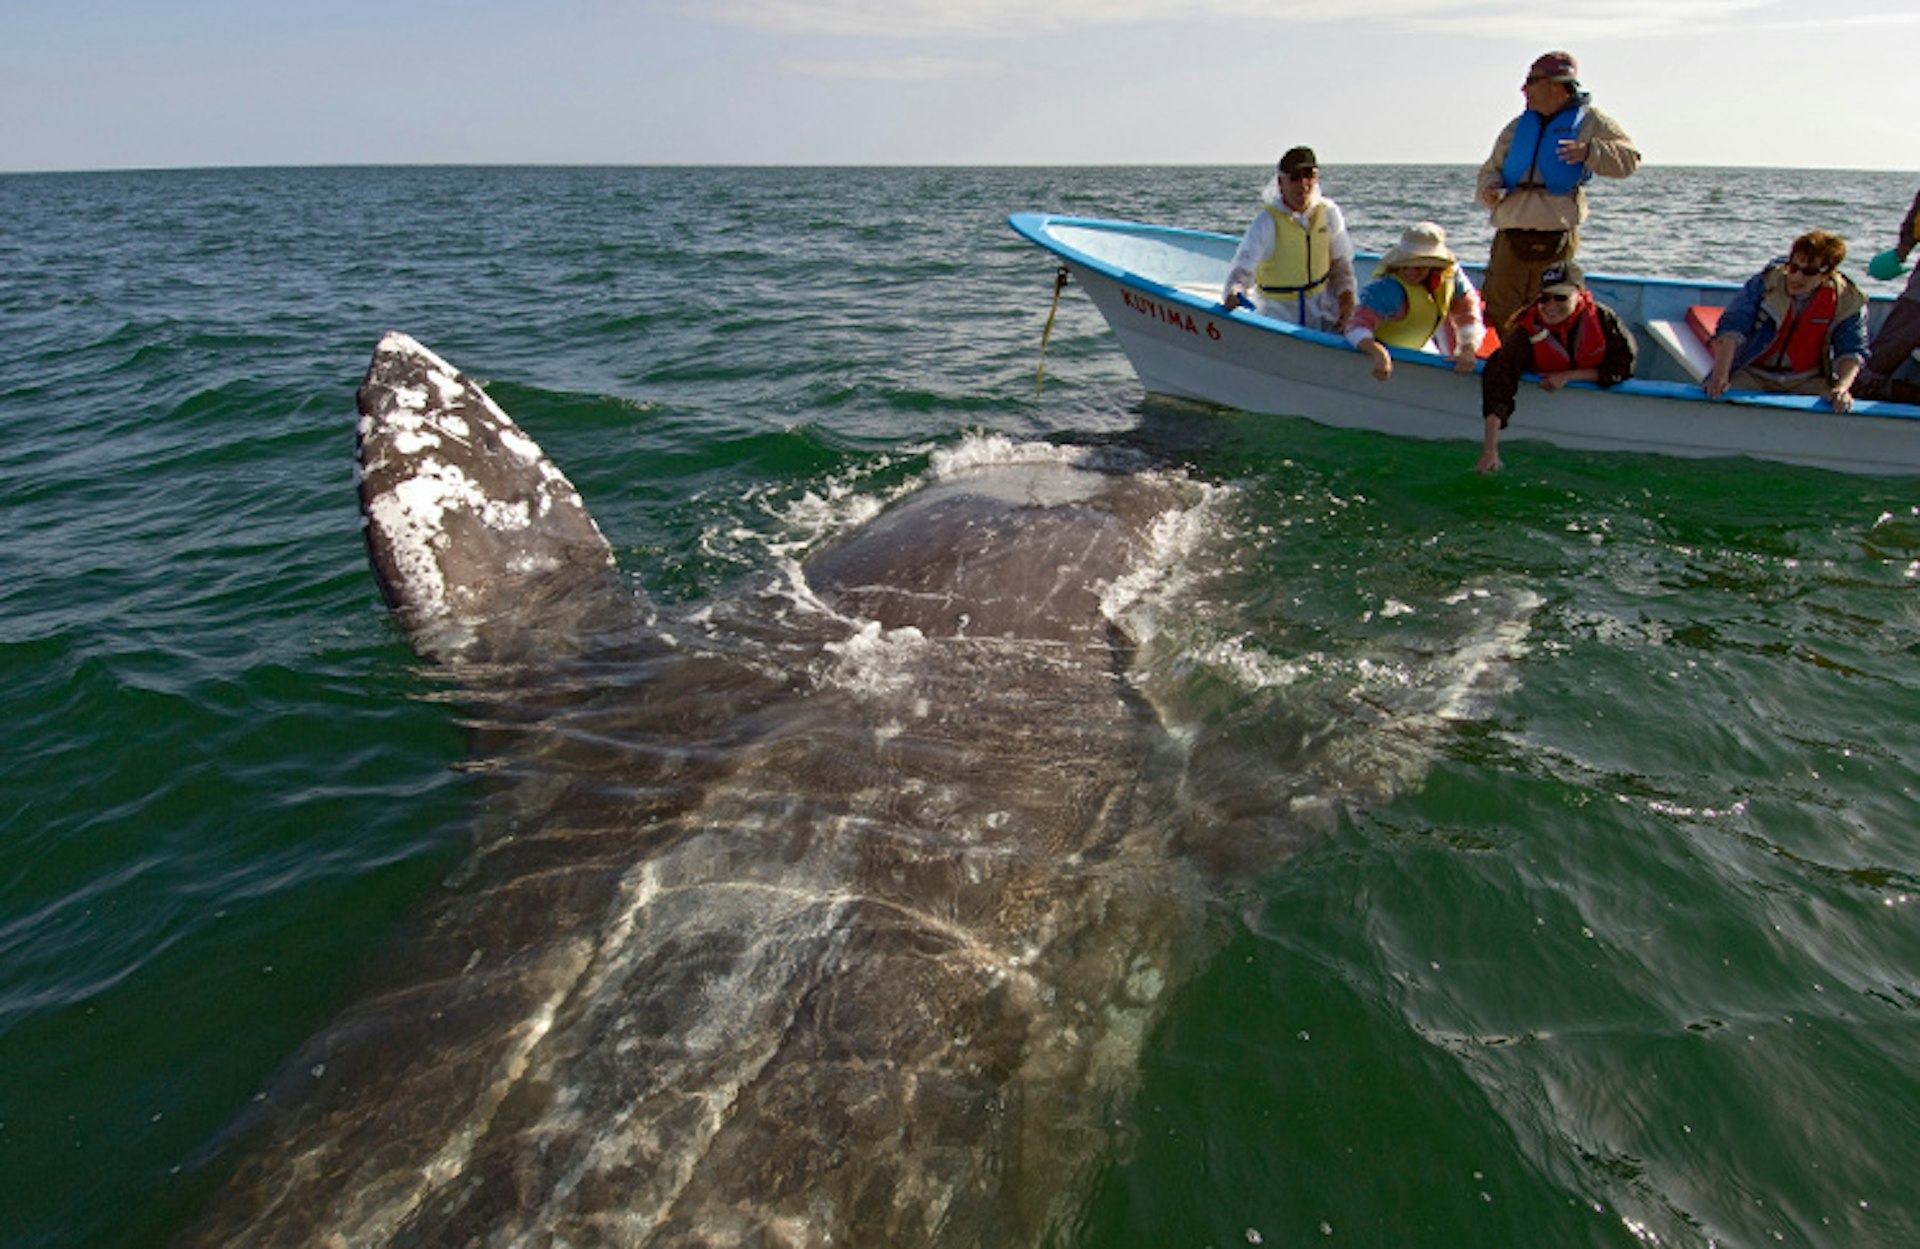 Gray whales have become used to human interaction in San Ignacio Lagoon. Image by Doug Steakley / Lonely Planet Images / Getty Images